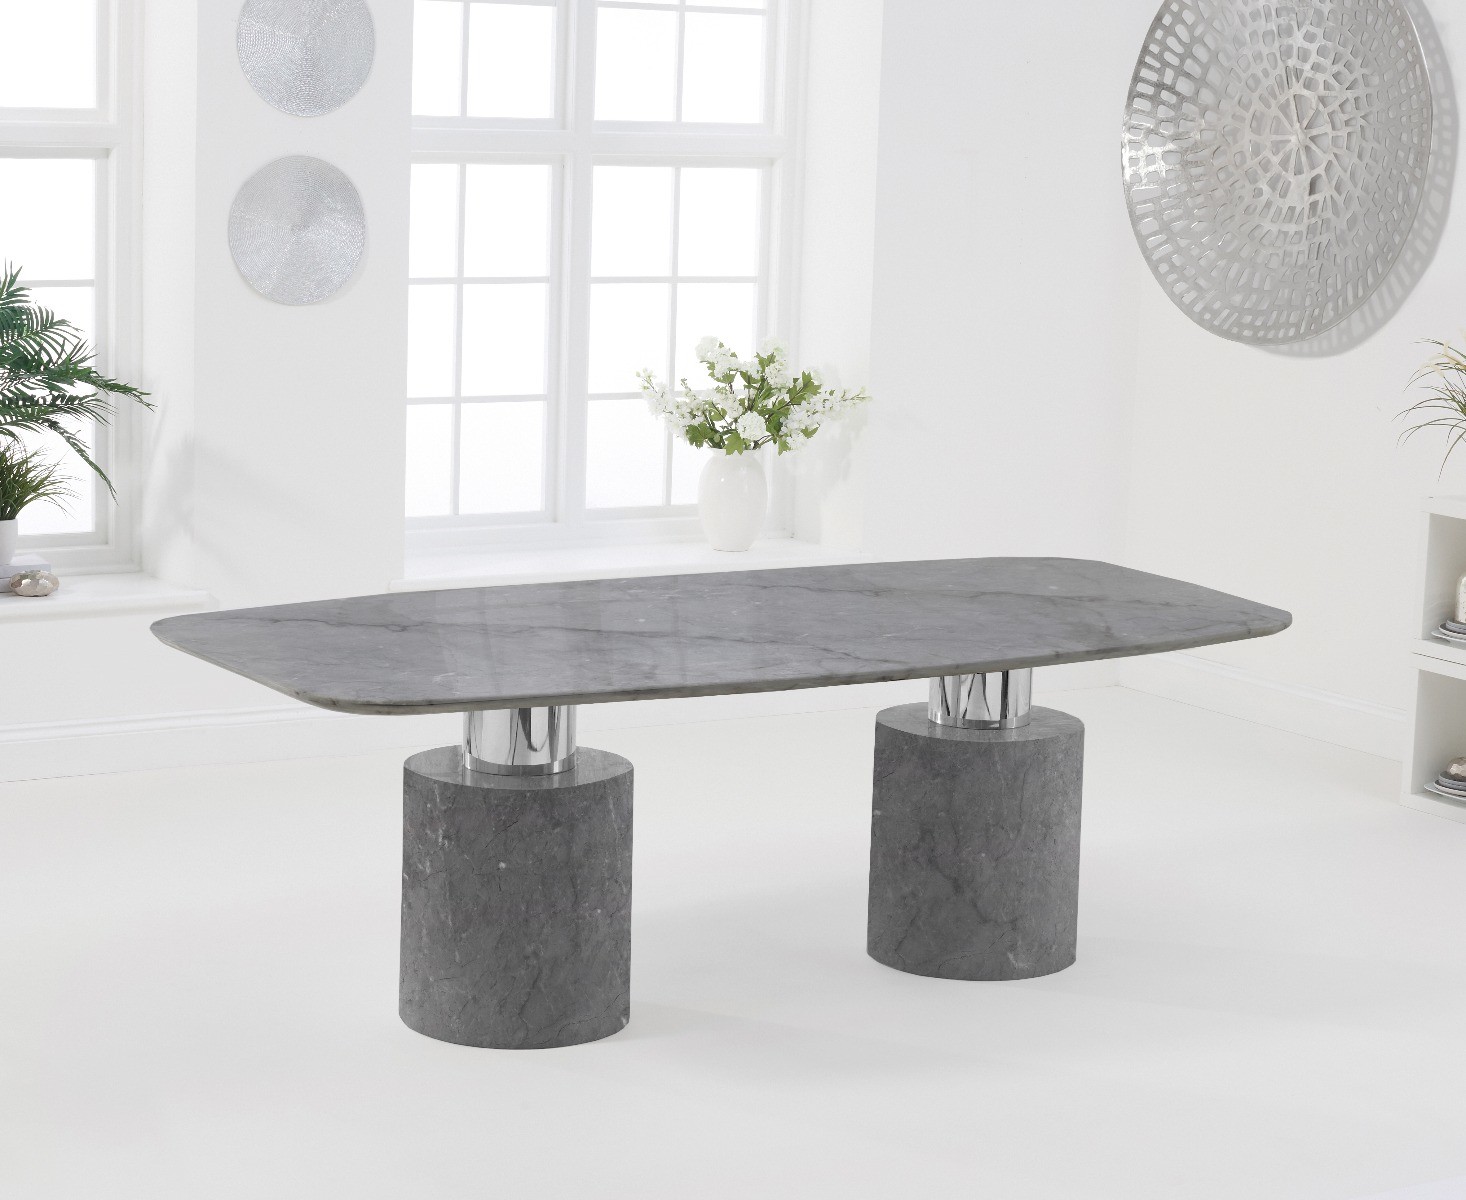 Photo 3 of Antonio 220cm grey marble dining table with 8 grey lorenzo chairs